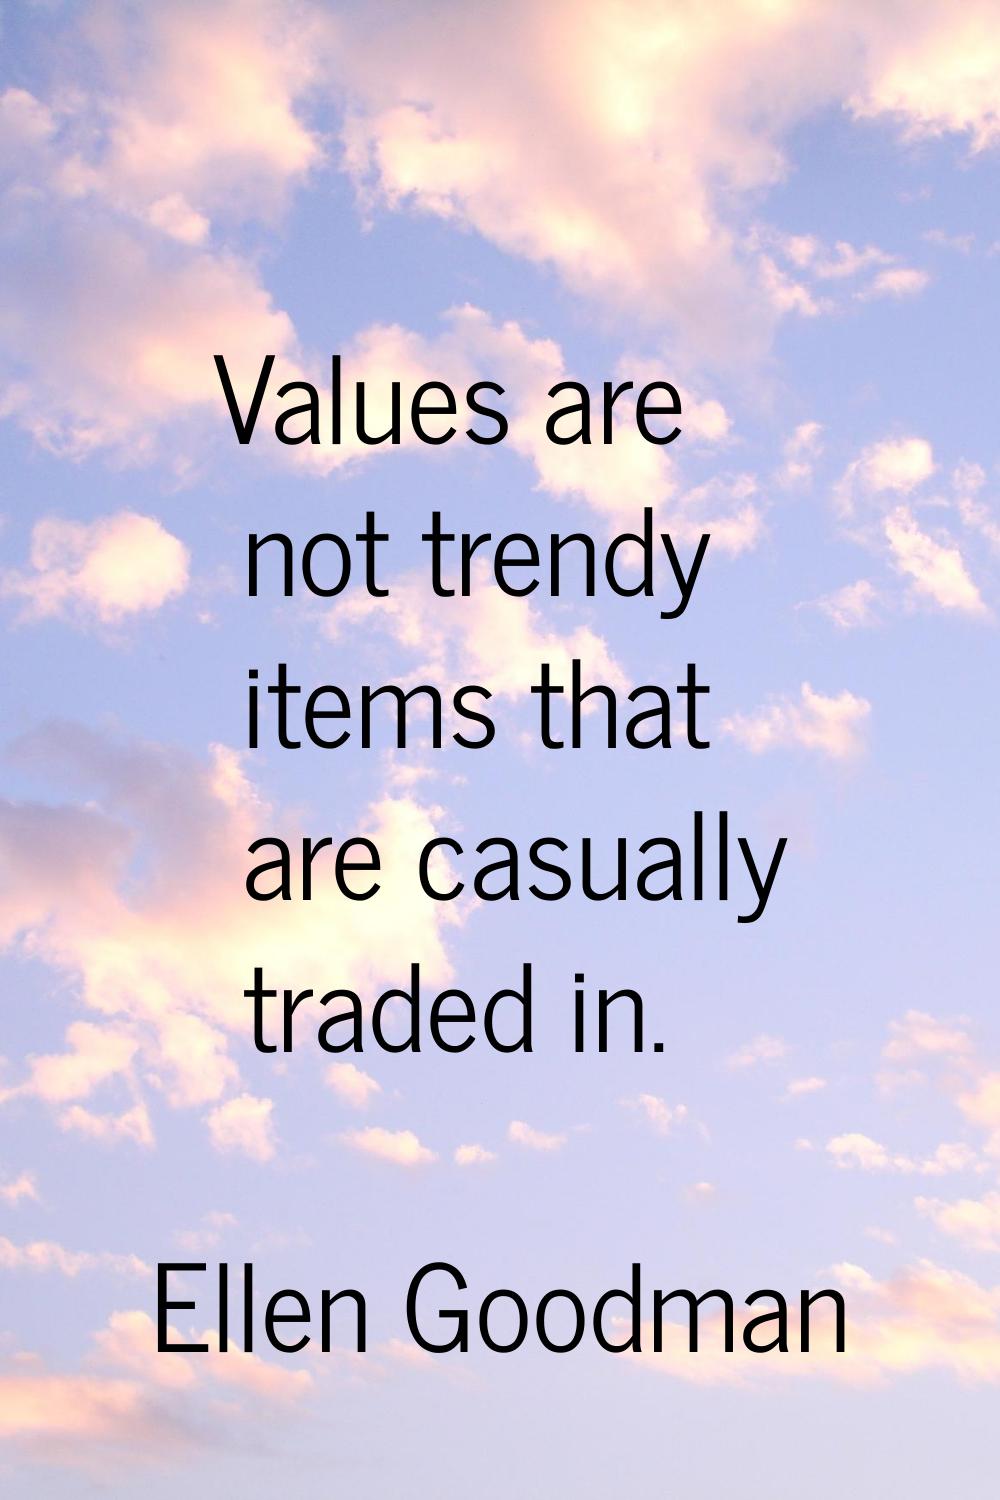 Values are not trendy items that are casually traded in.